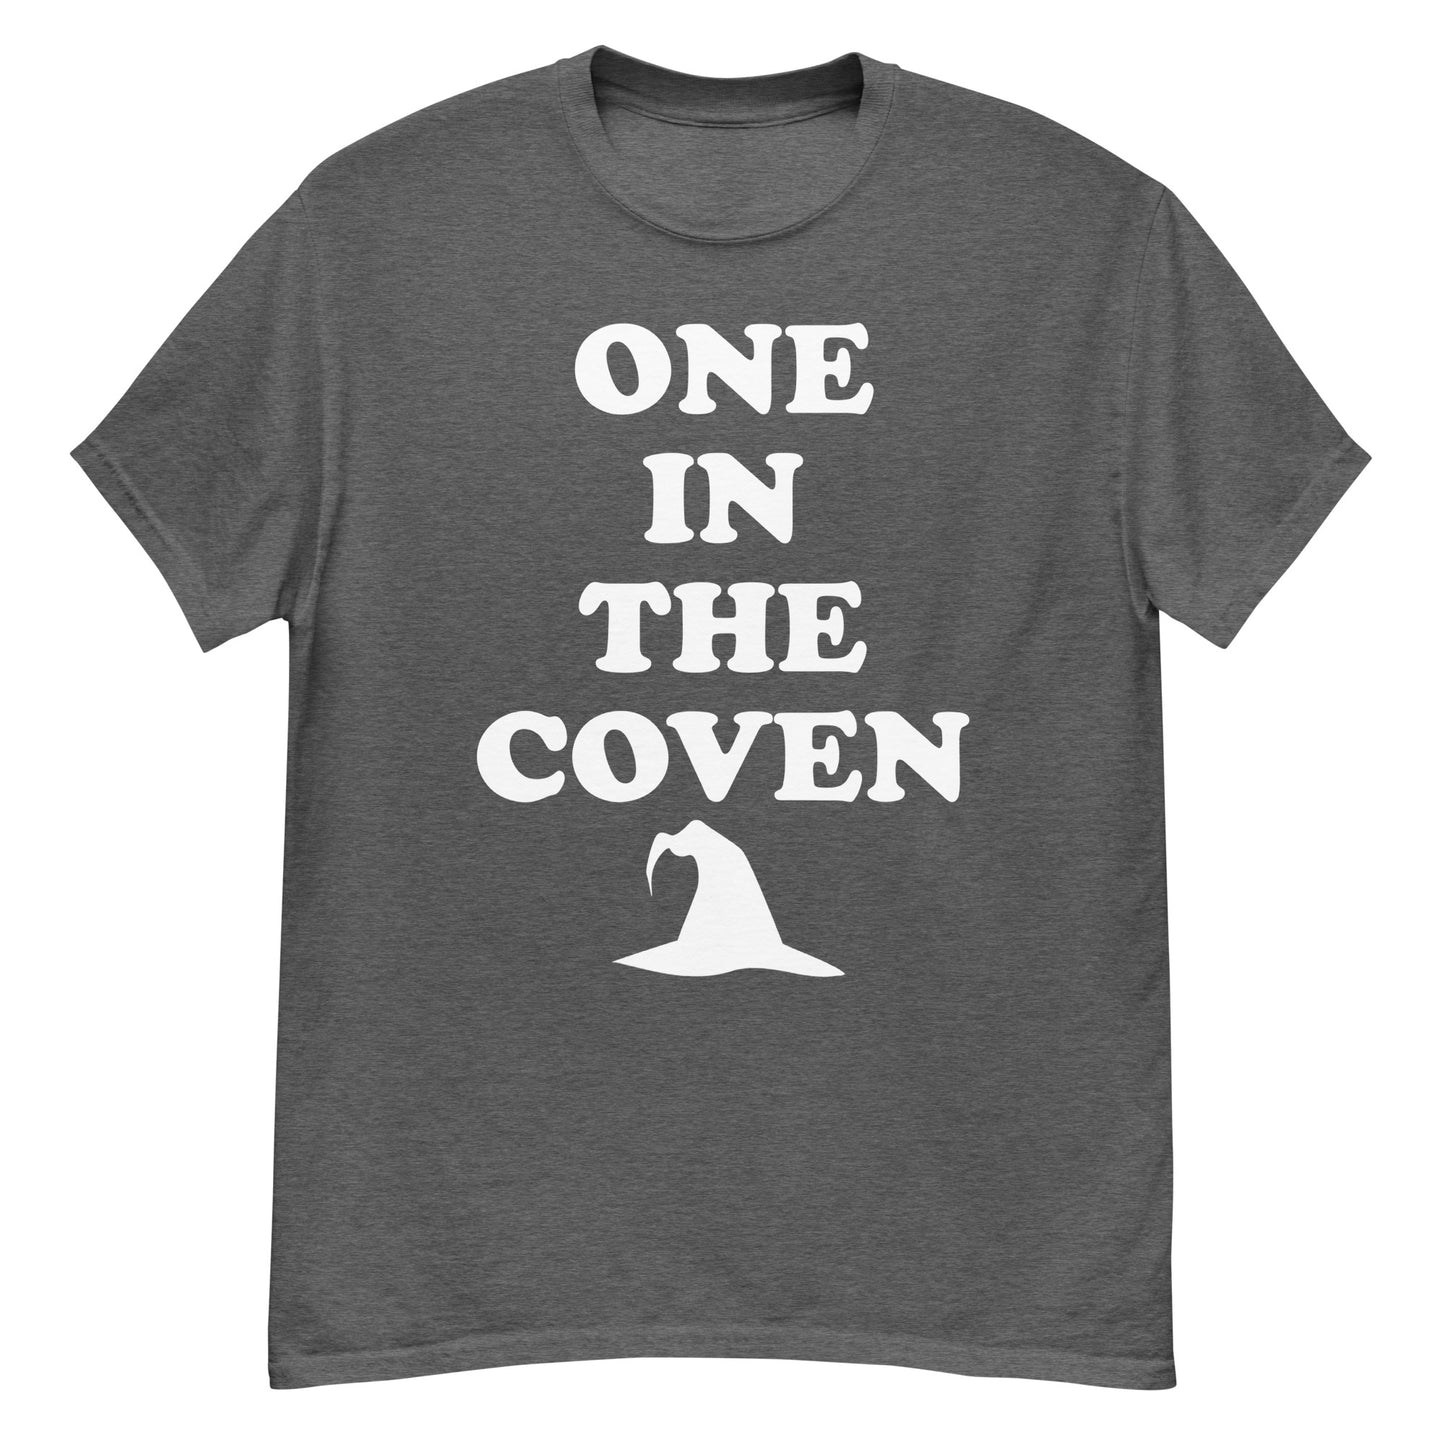 One in the Coven t-shirt